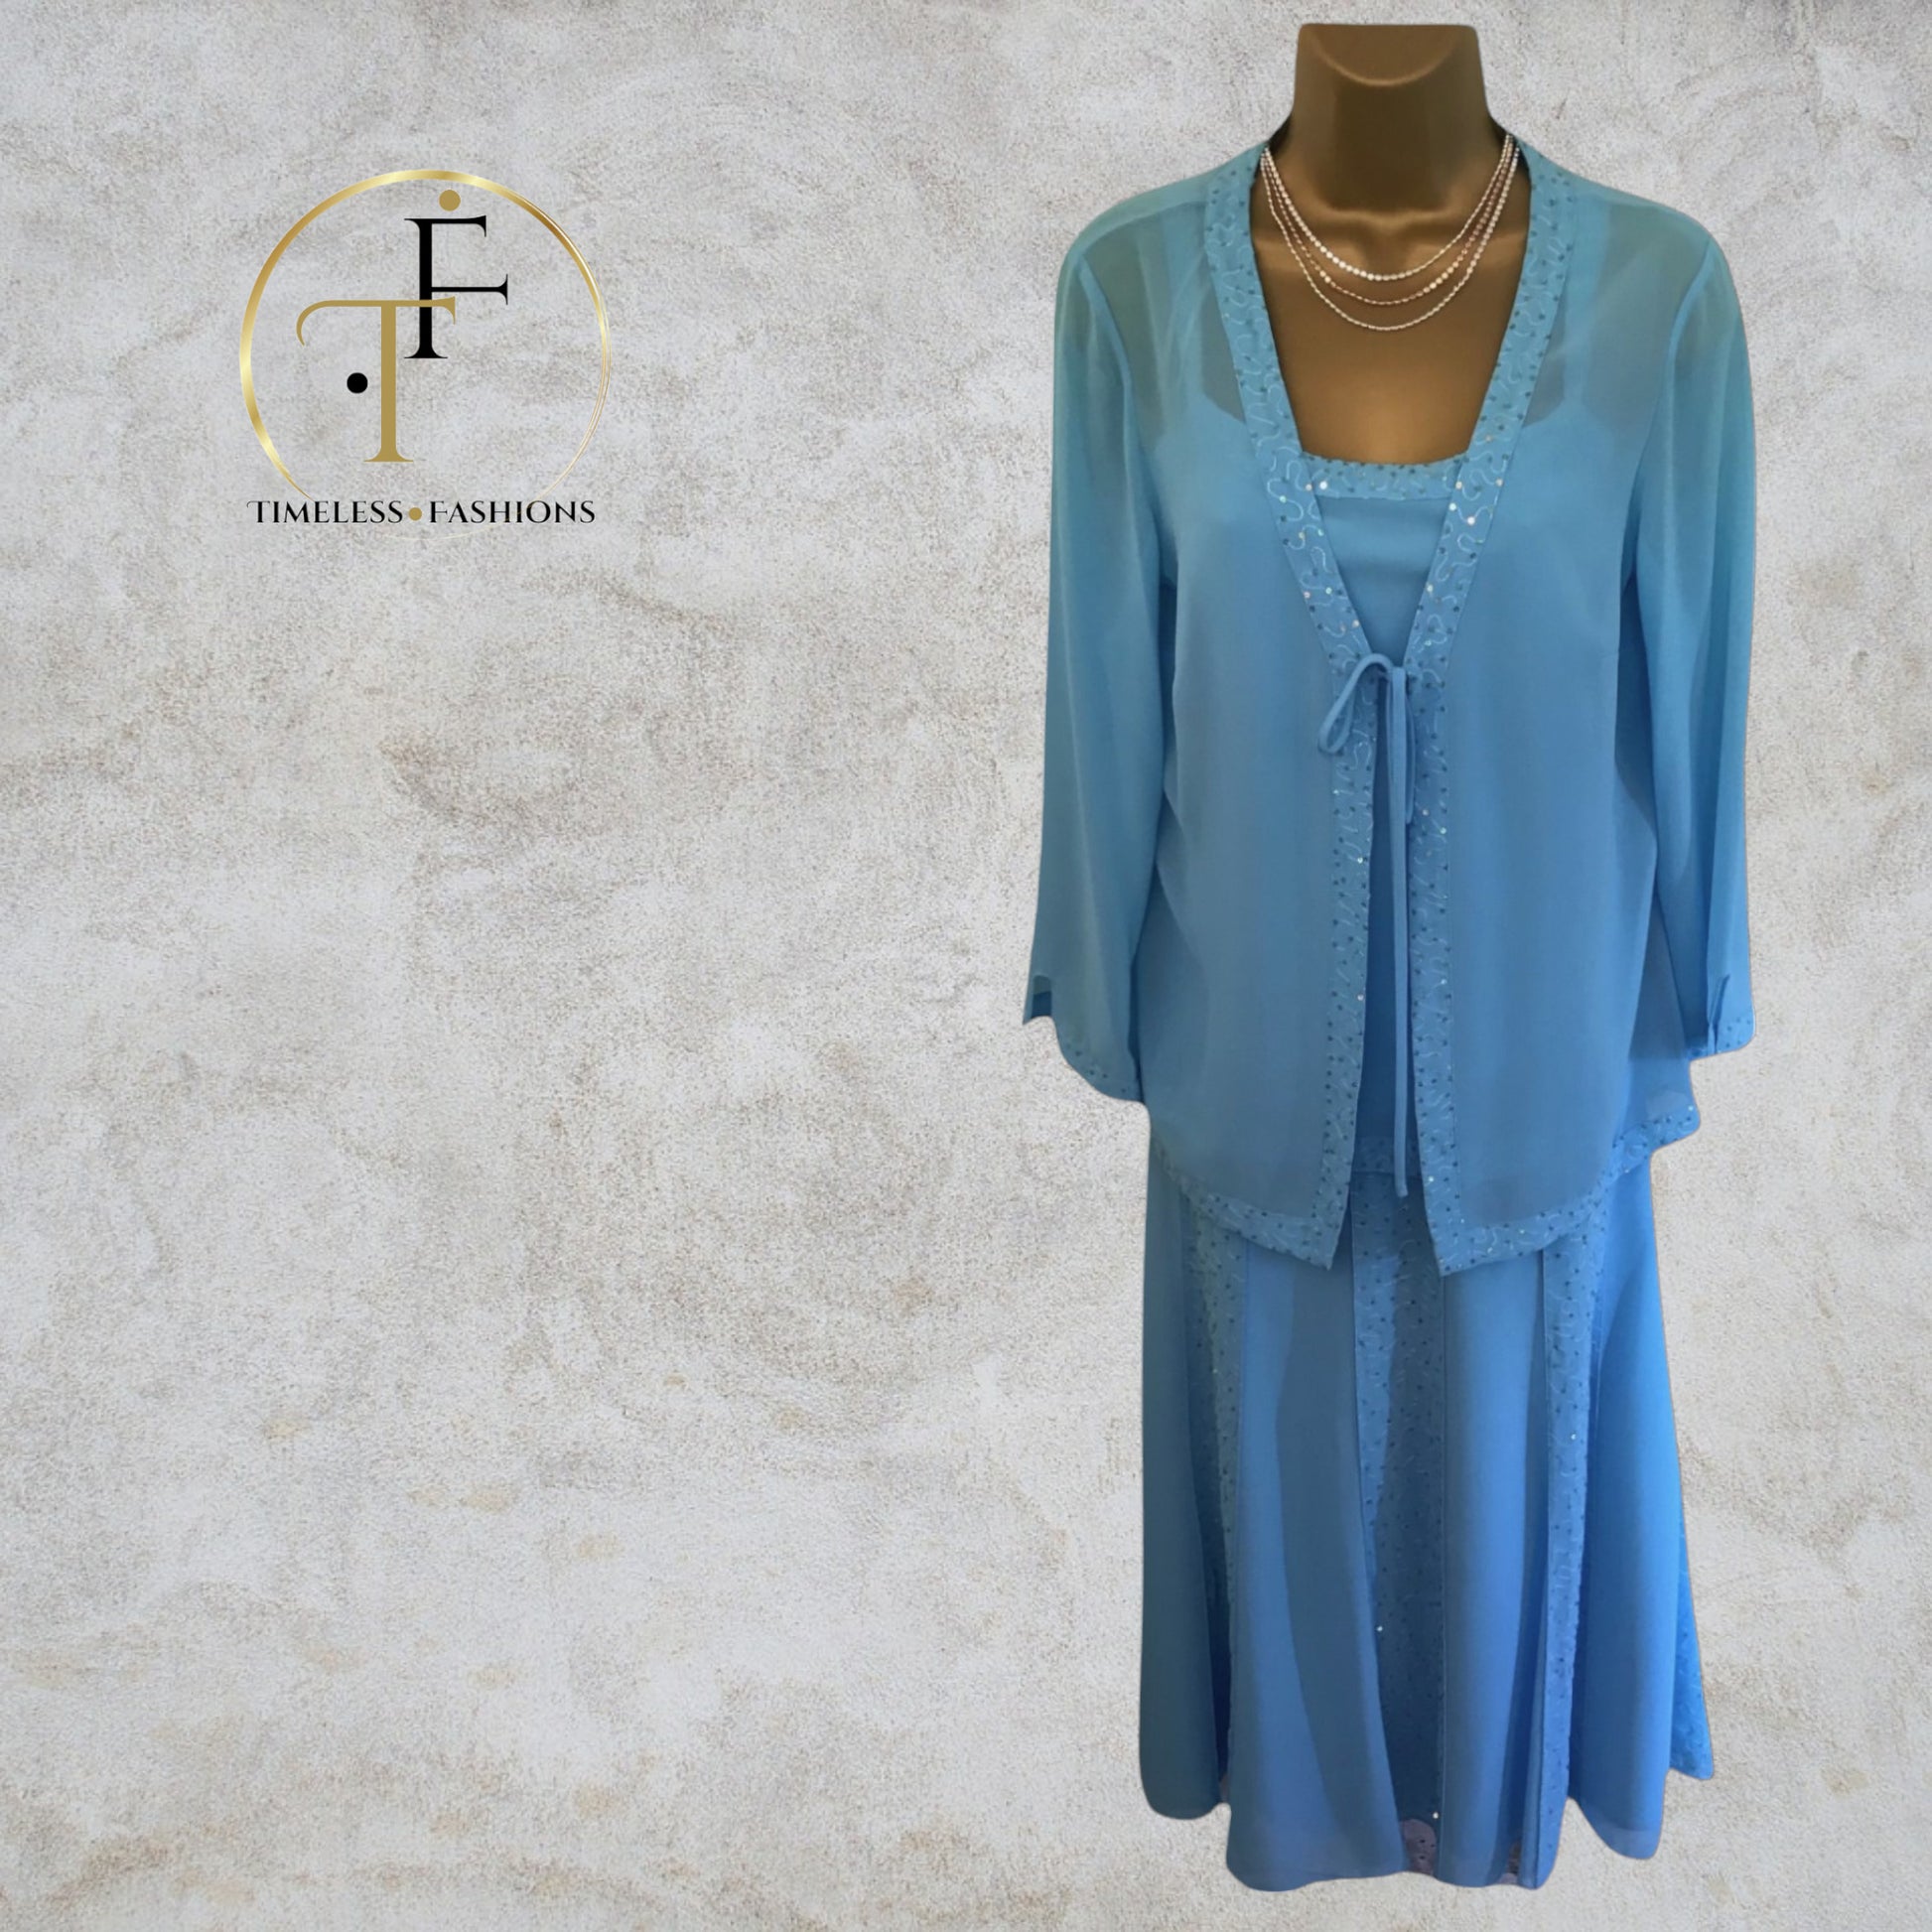 Gina Bacconi Turquoise Chiffon 3 Piece Special Occasion Outfit UK 12 BNWT RRP £250.00 Timeless Fashions